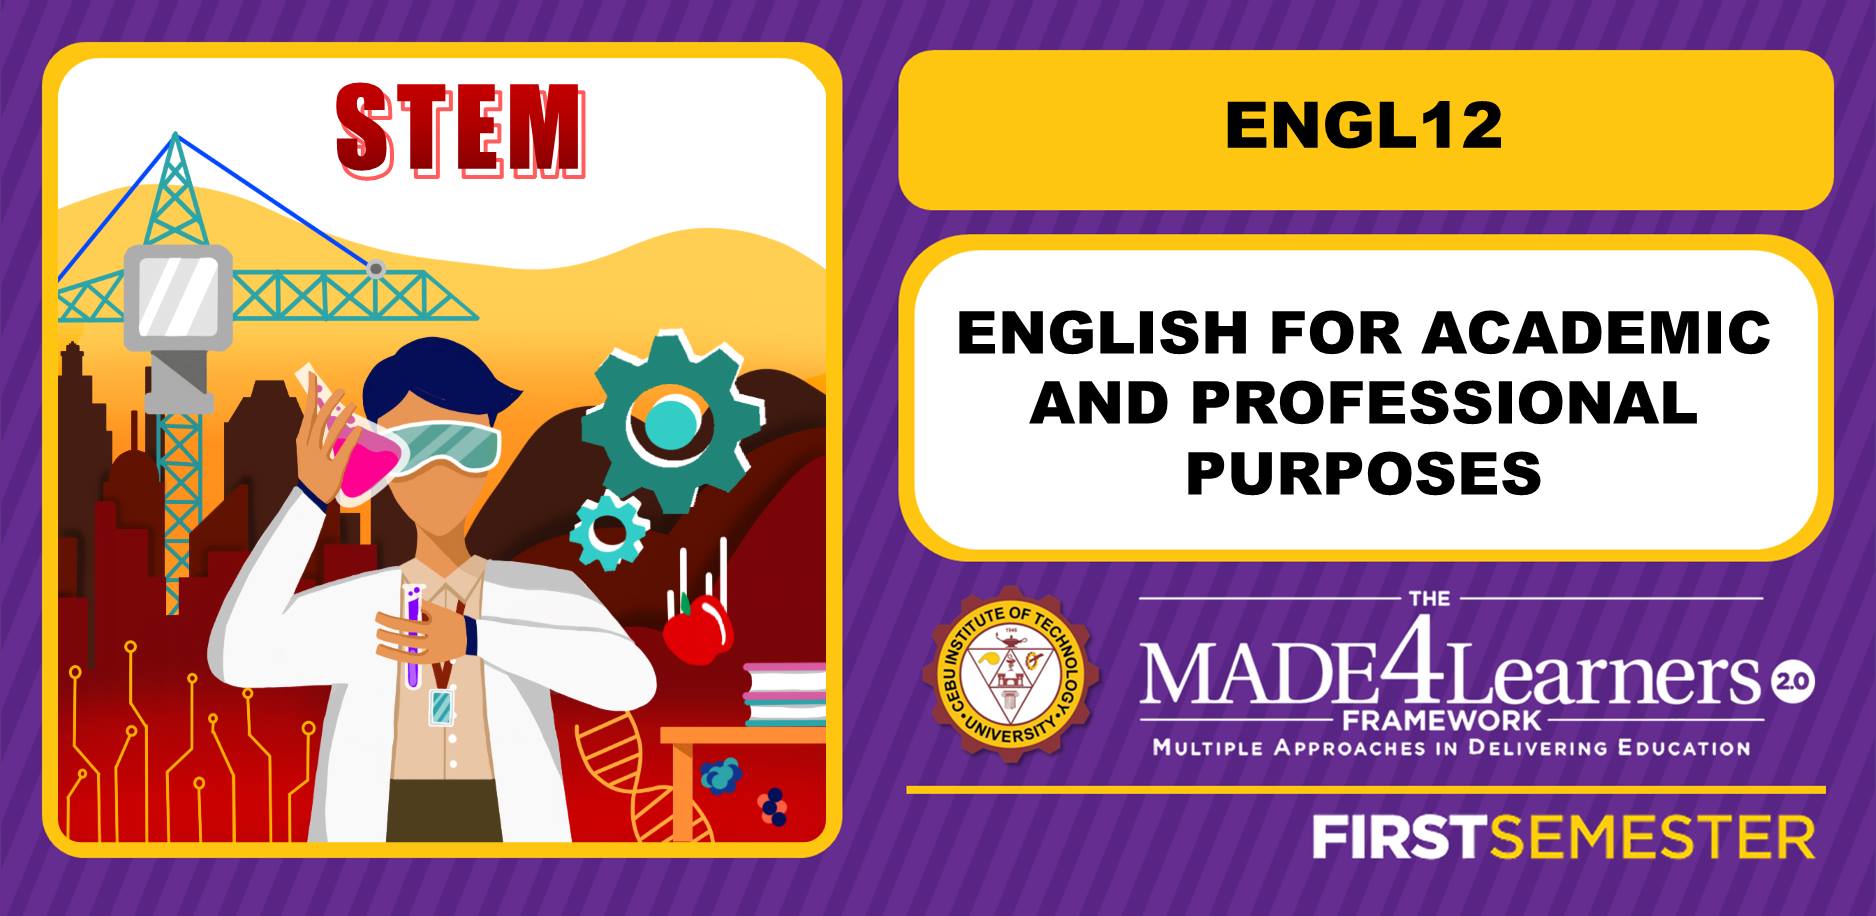 ENGL12: English for Academic and Professional Purposes (Martinez)